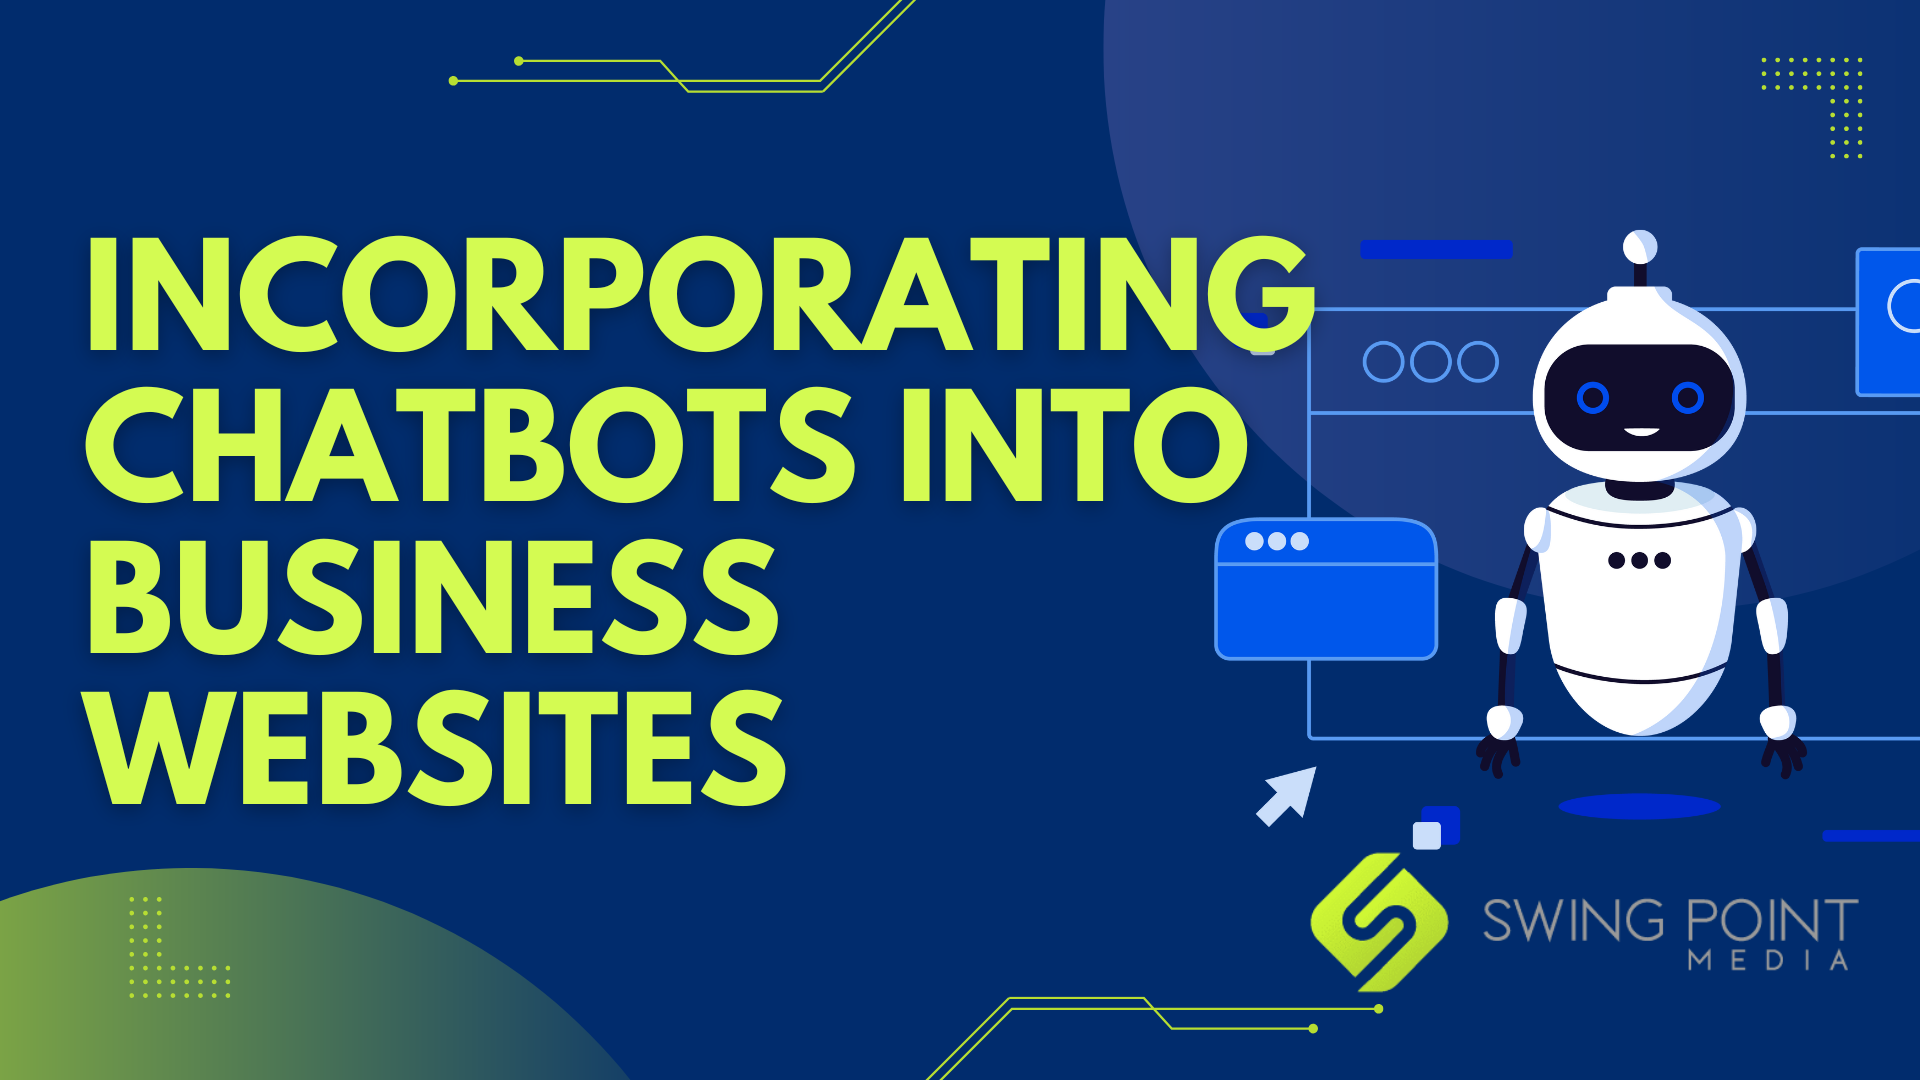 Incorporating Chatbots into Business Websites